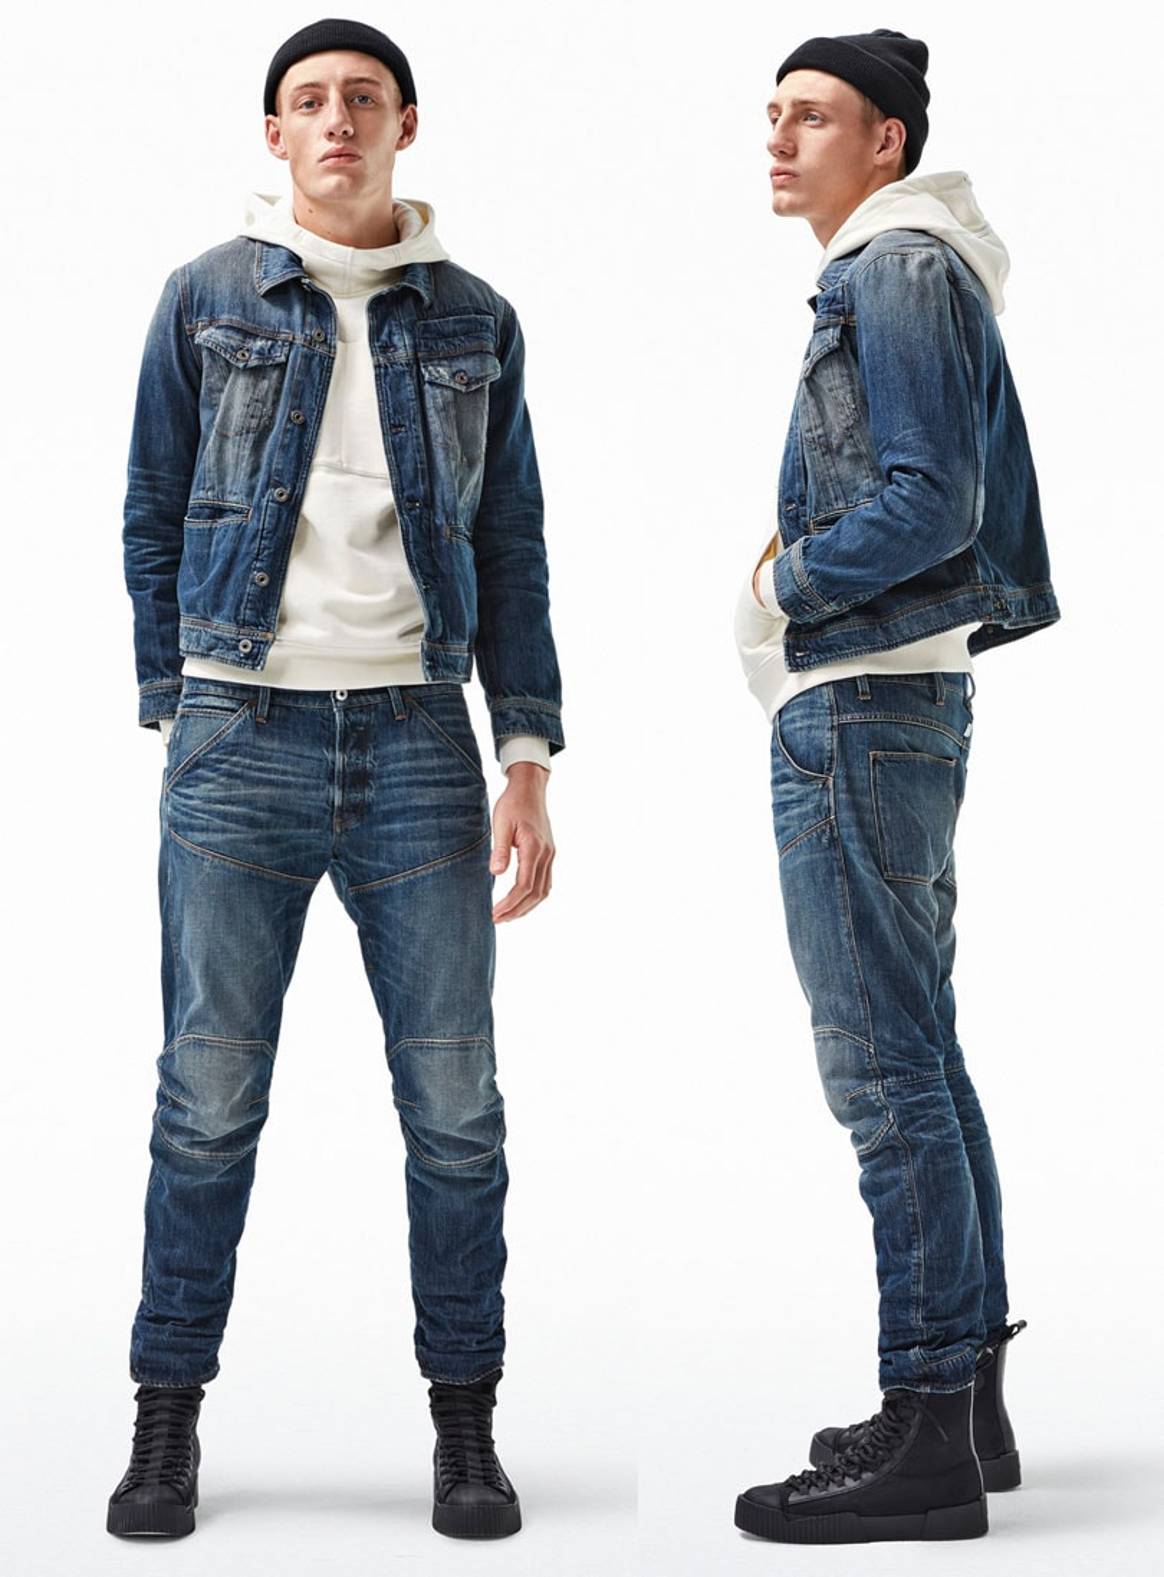 G-Star Raw unveils ‘Most Sustainable Jeans Ever’